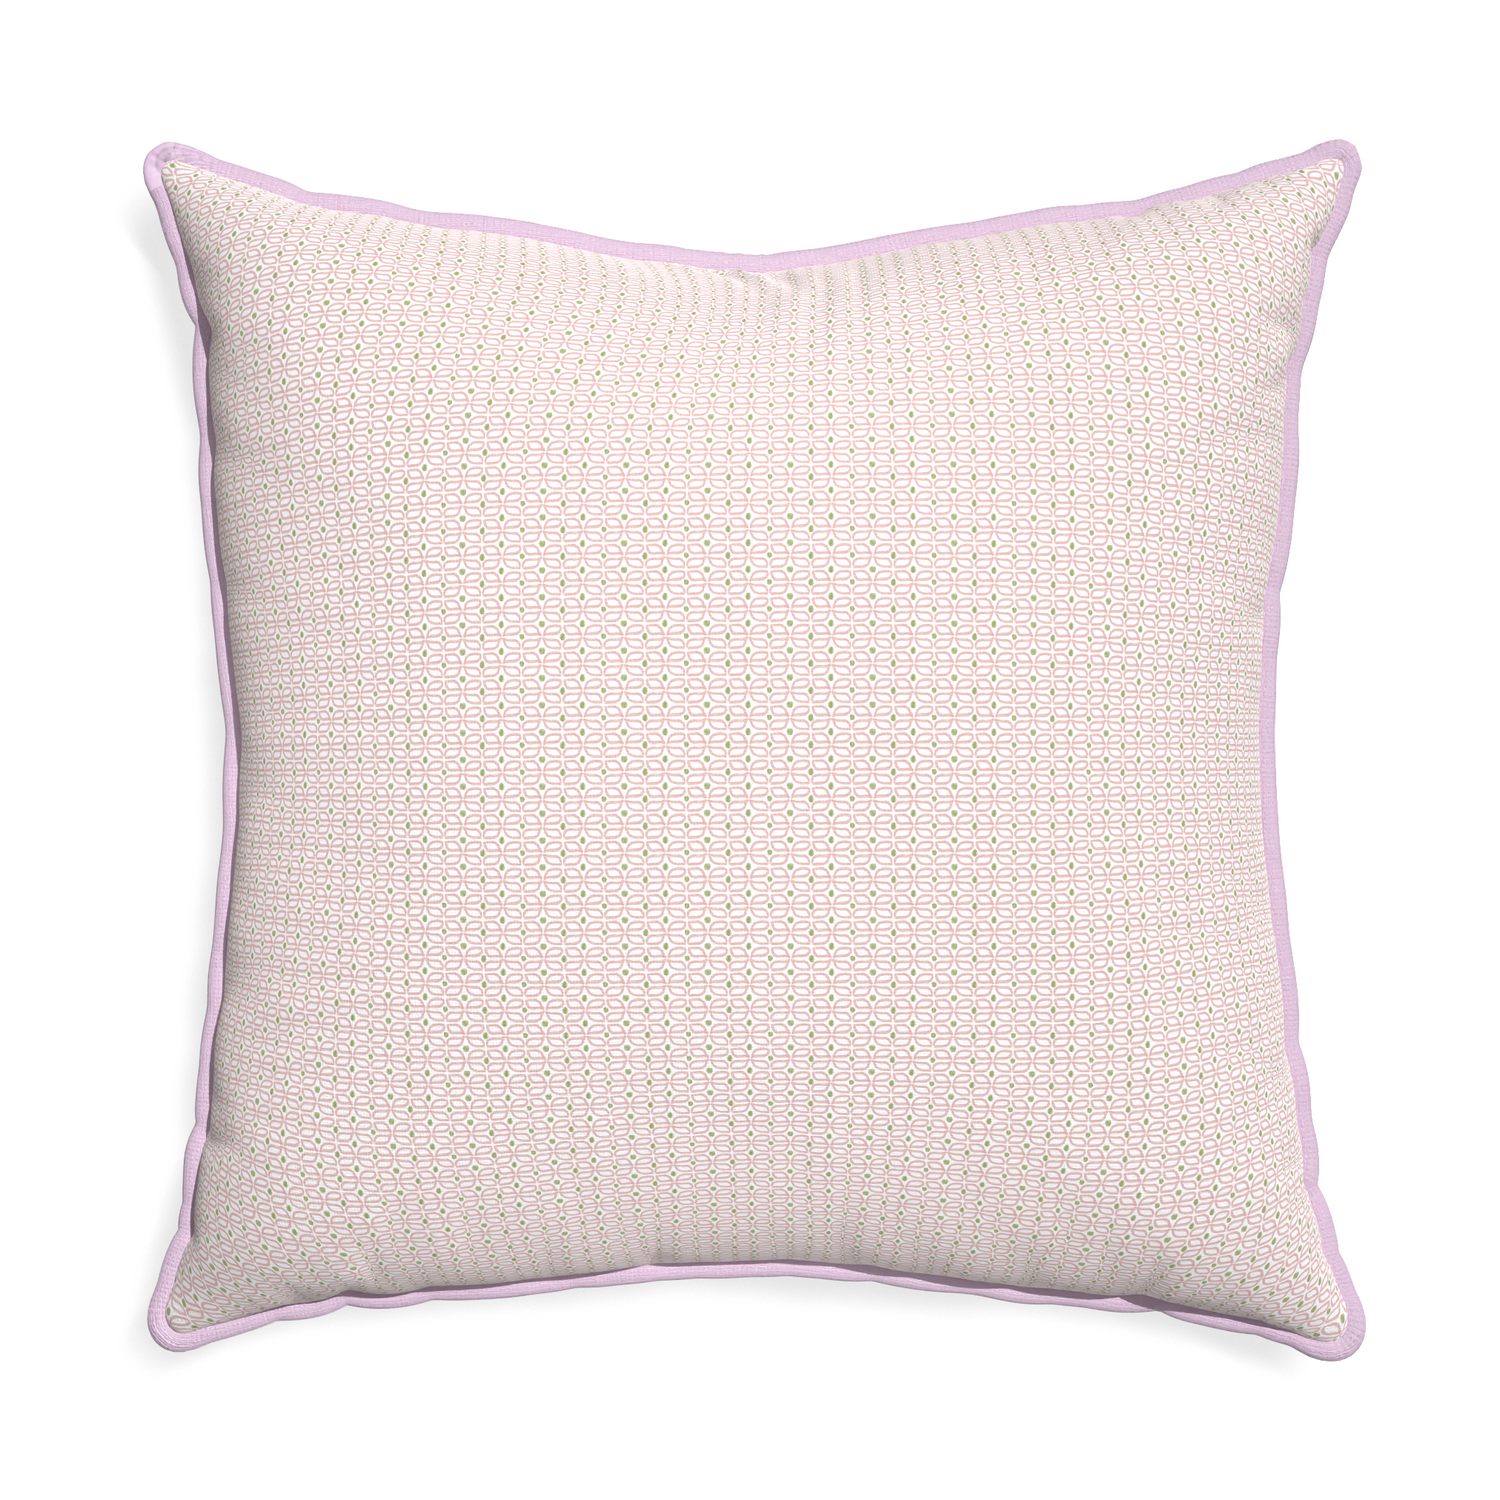 Euro-sham loomi pink custom pink geometricpillow with l piping on white background